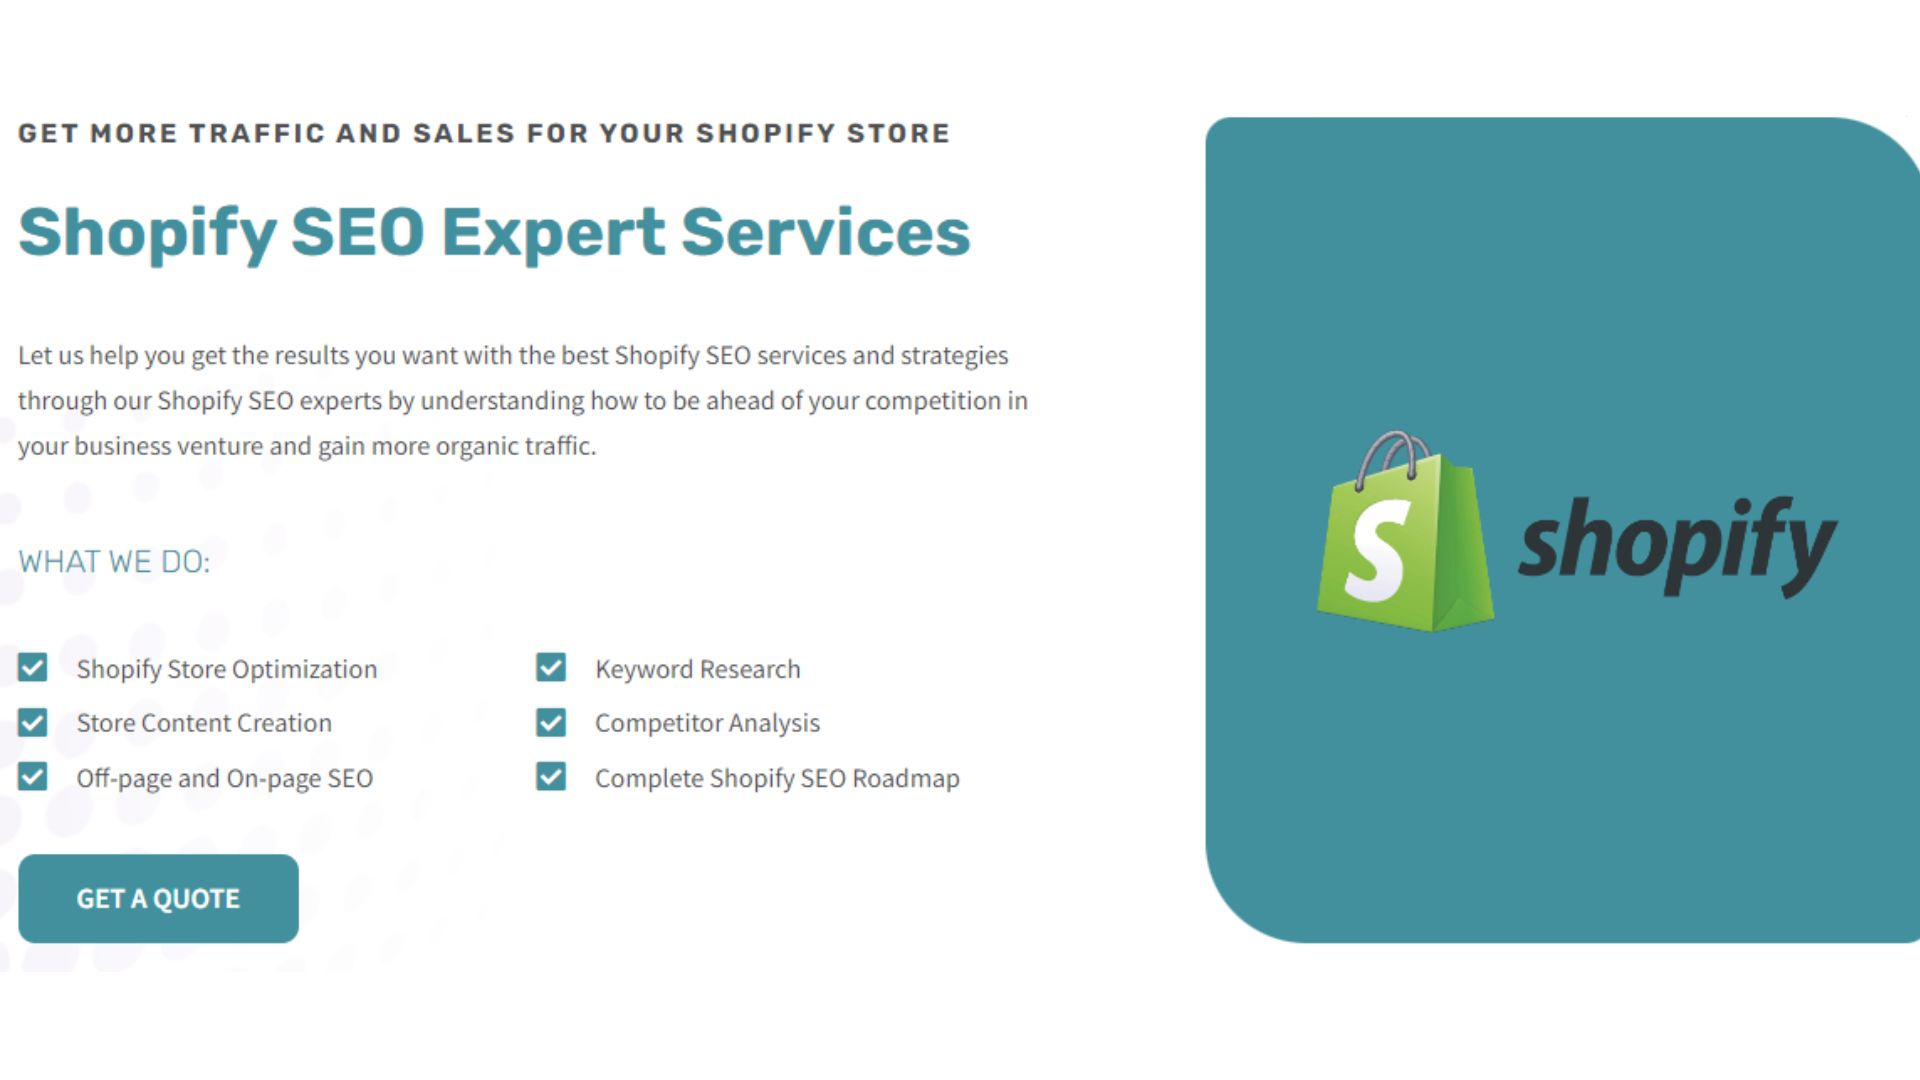 Shopify Seo Expert What To Look For In A Shopify Seo Expert Before Hiring Them?